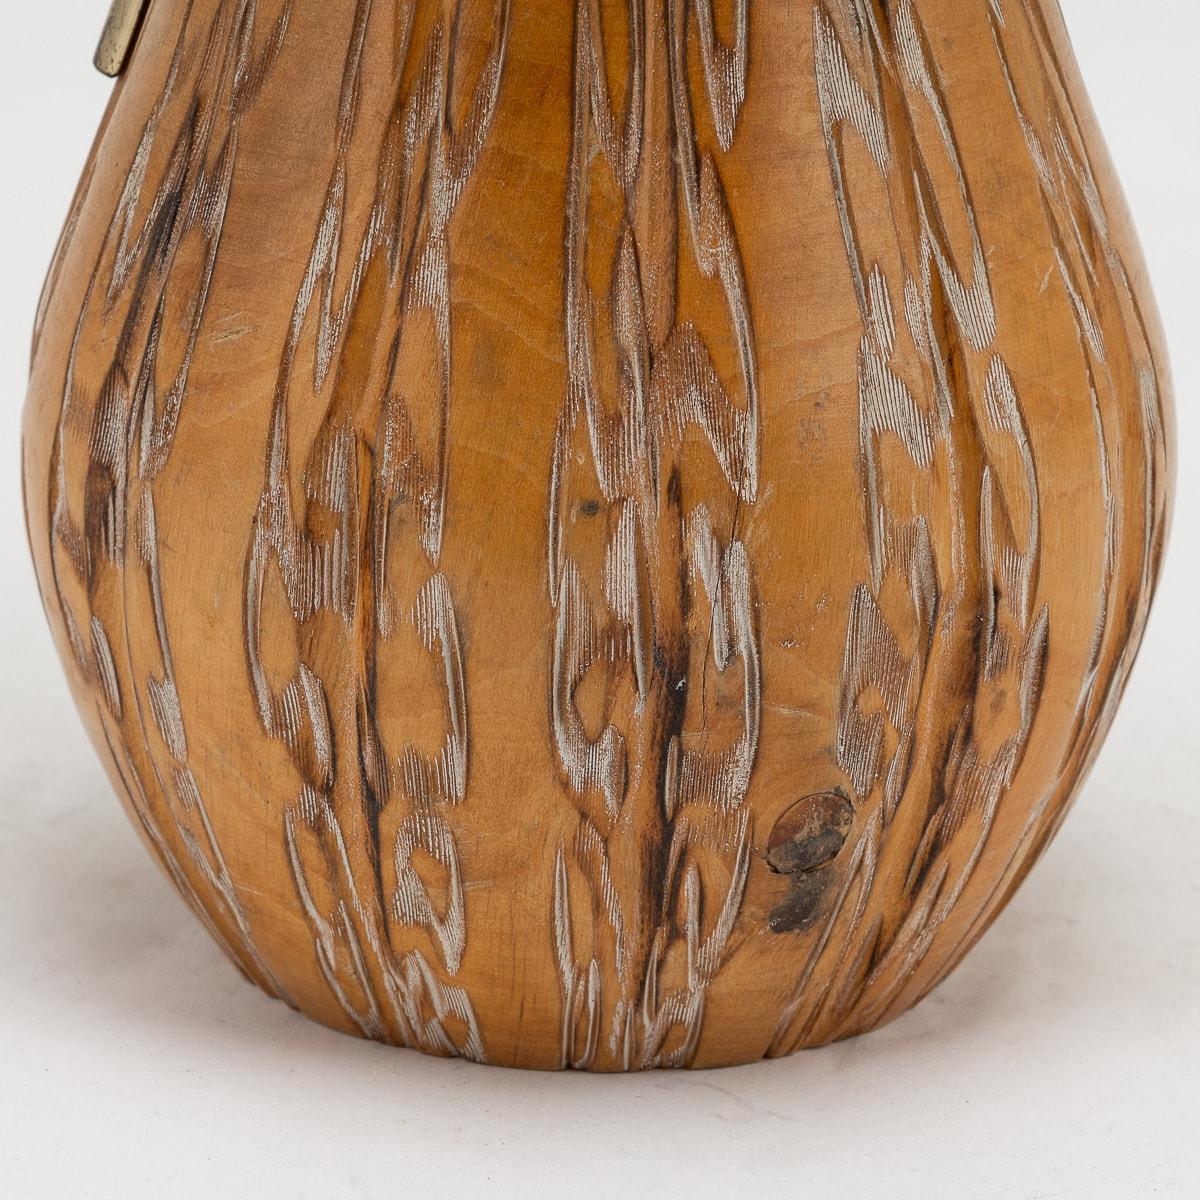 20th Century Italian Carved Wood Flask By Aldo Tura For Macabo c.1960 For Sale 4